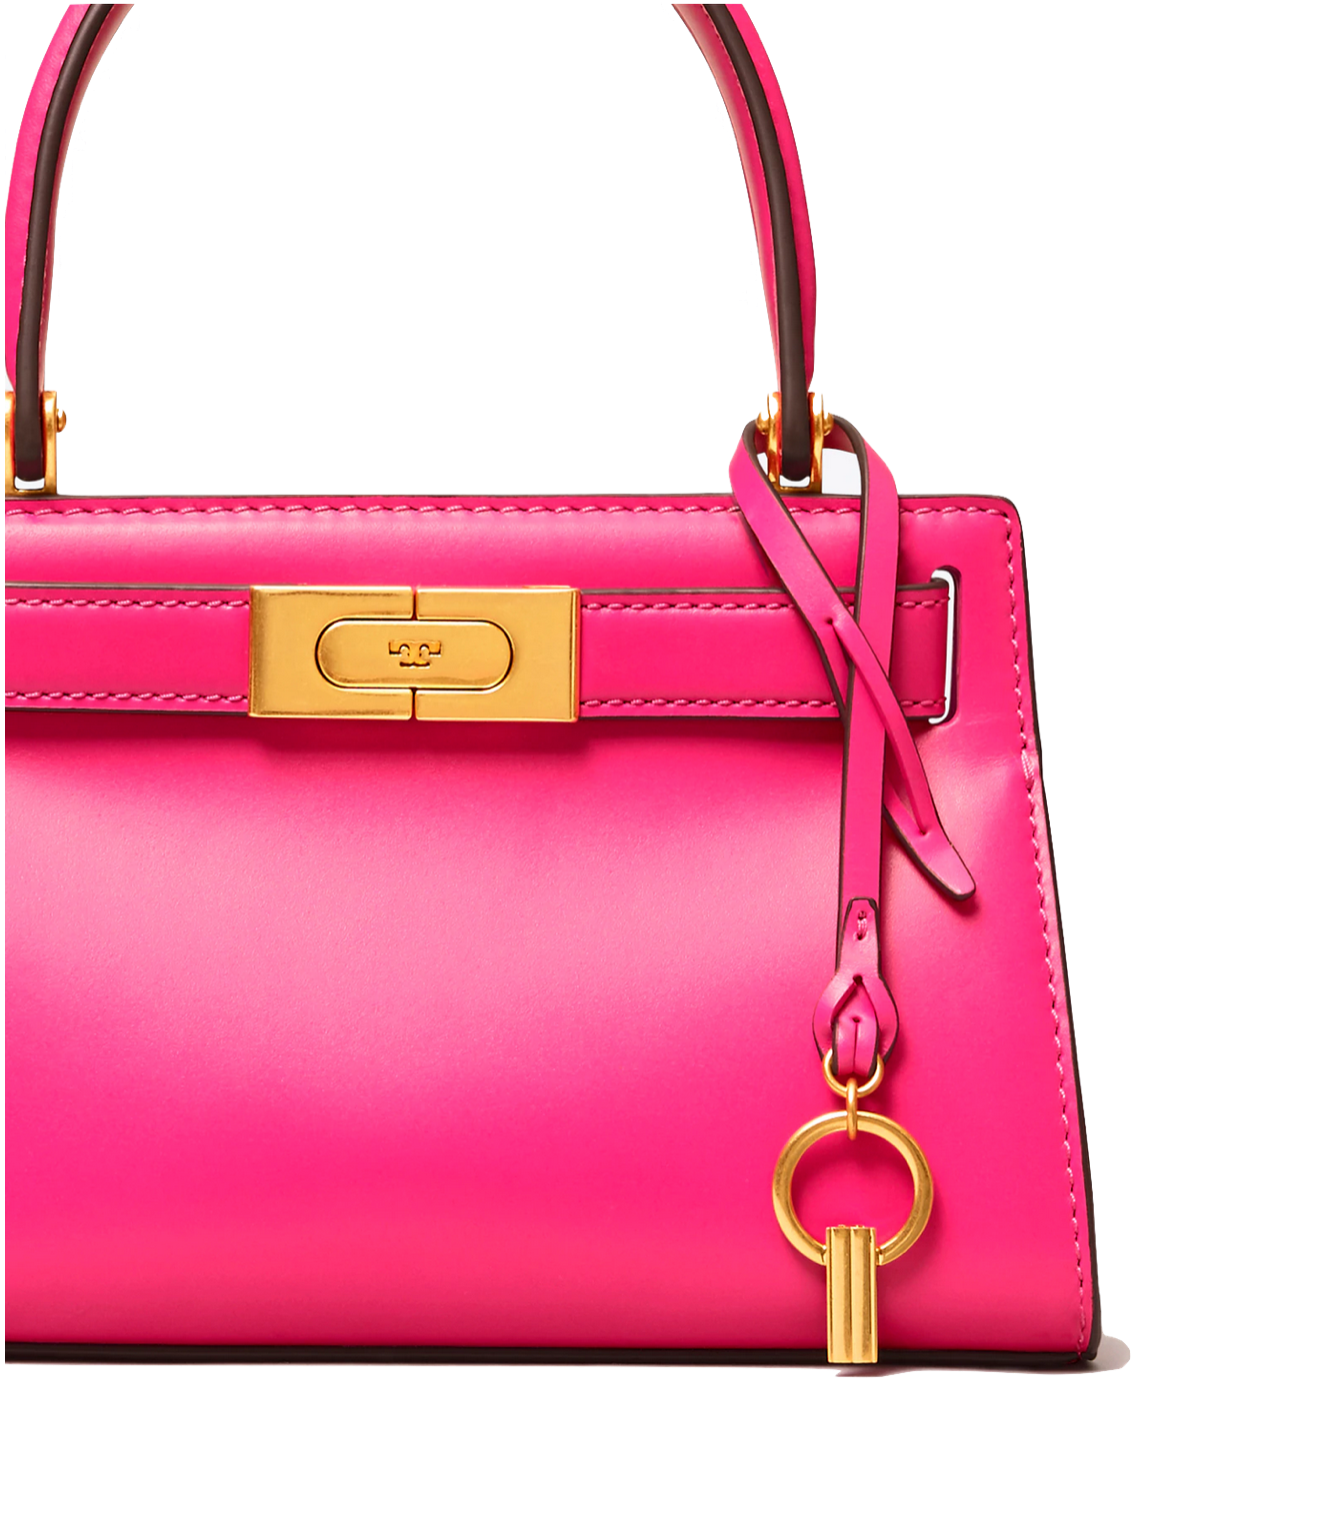 Crazy Pink Lee Radziwill Petite Bag by Tory Burch Accessories for